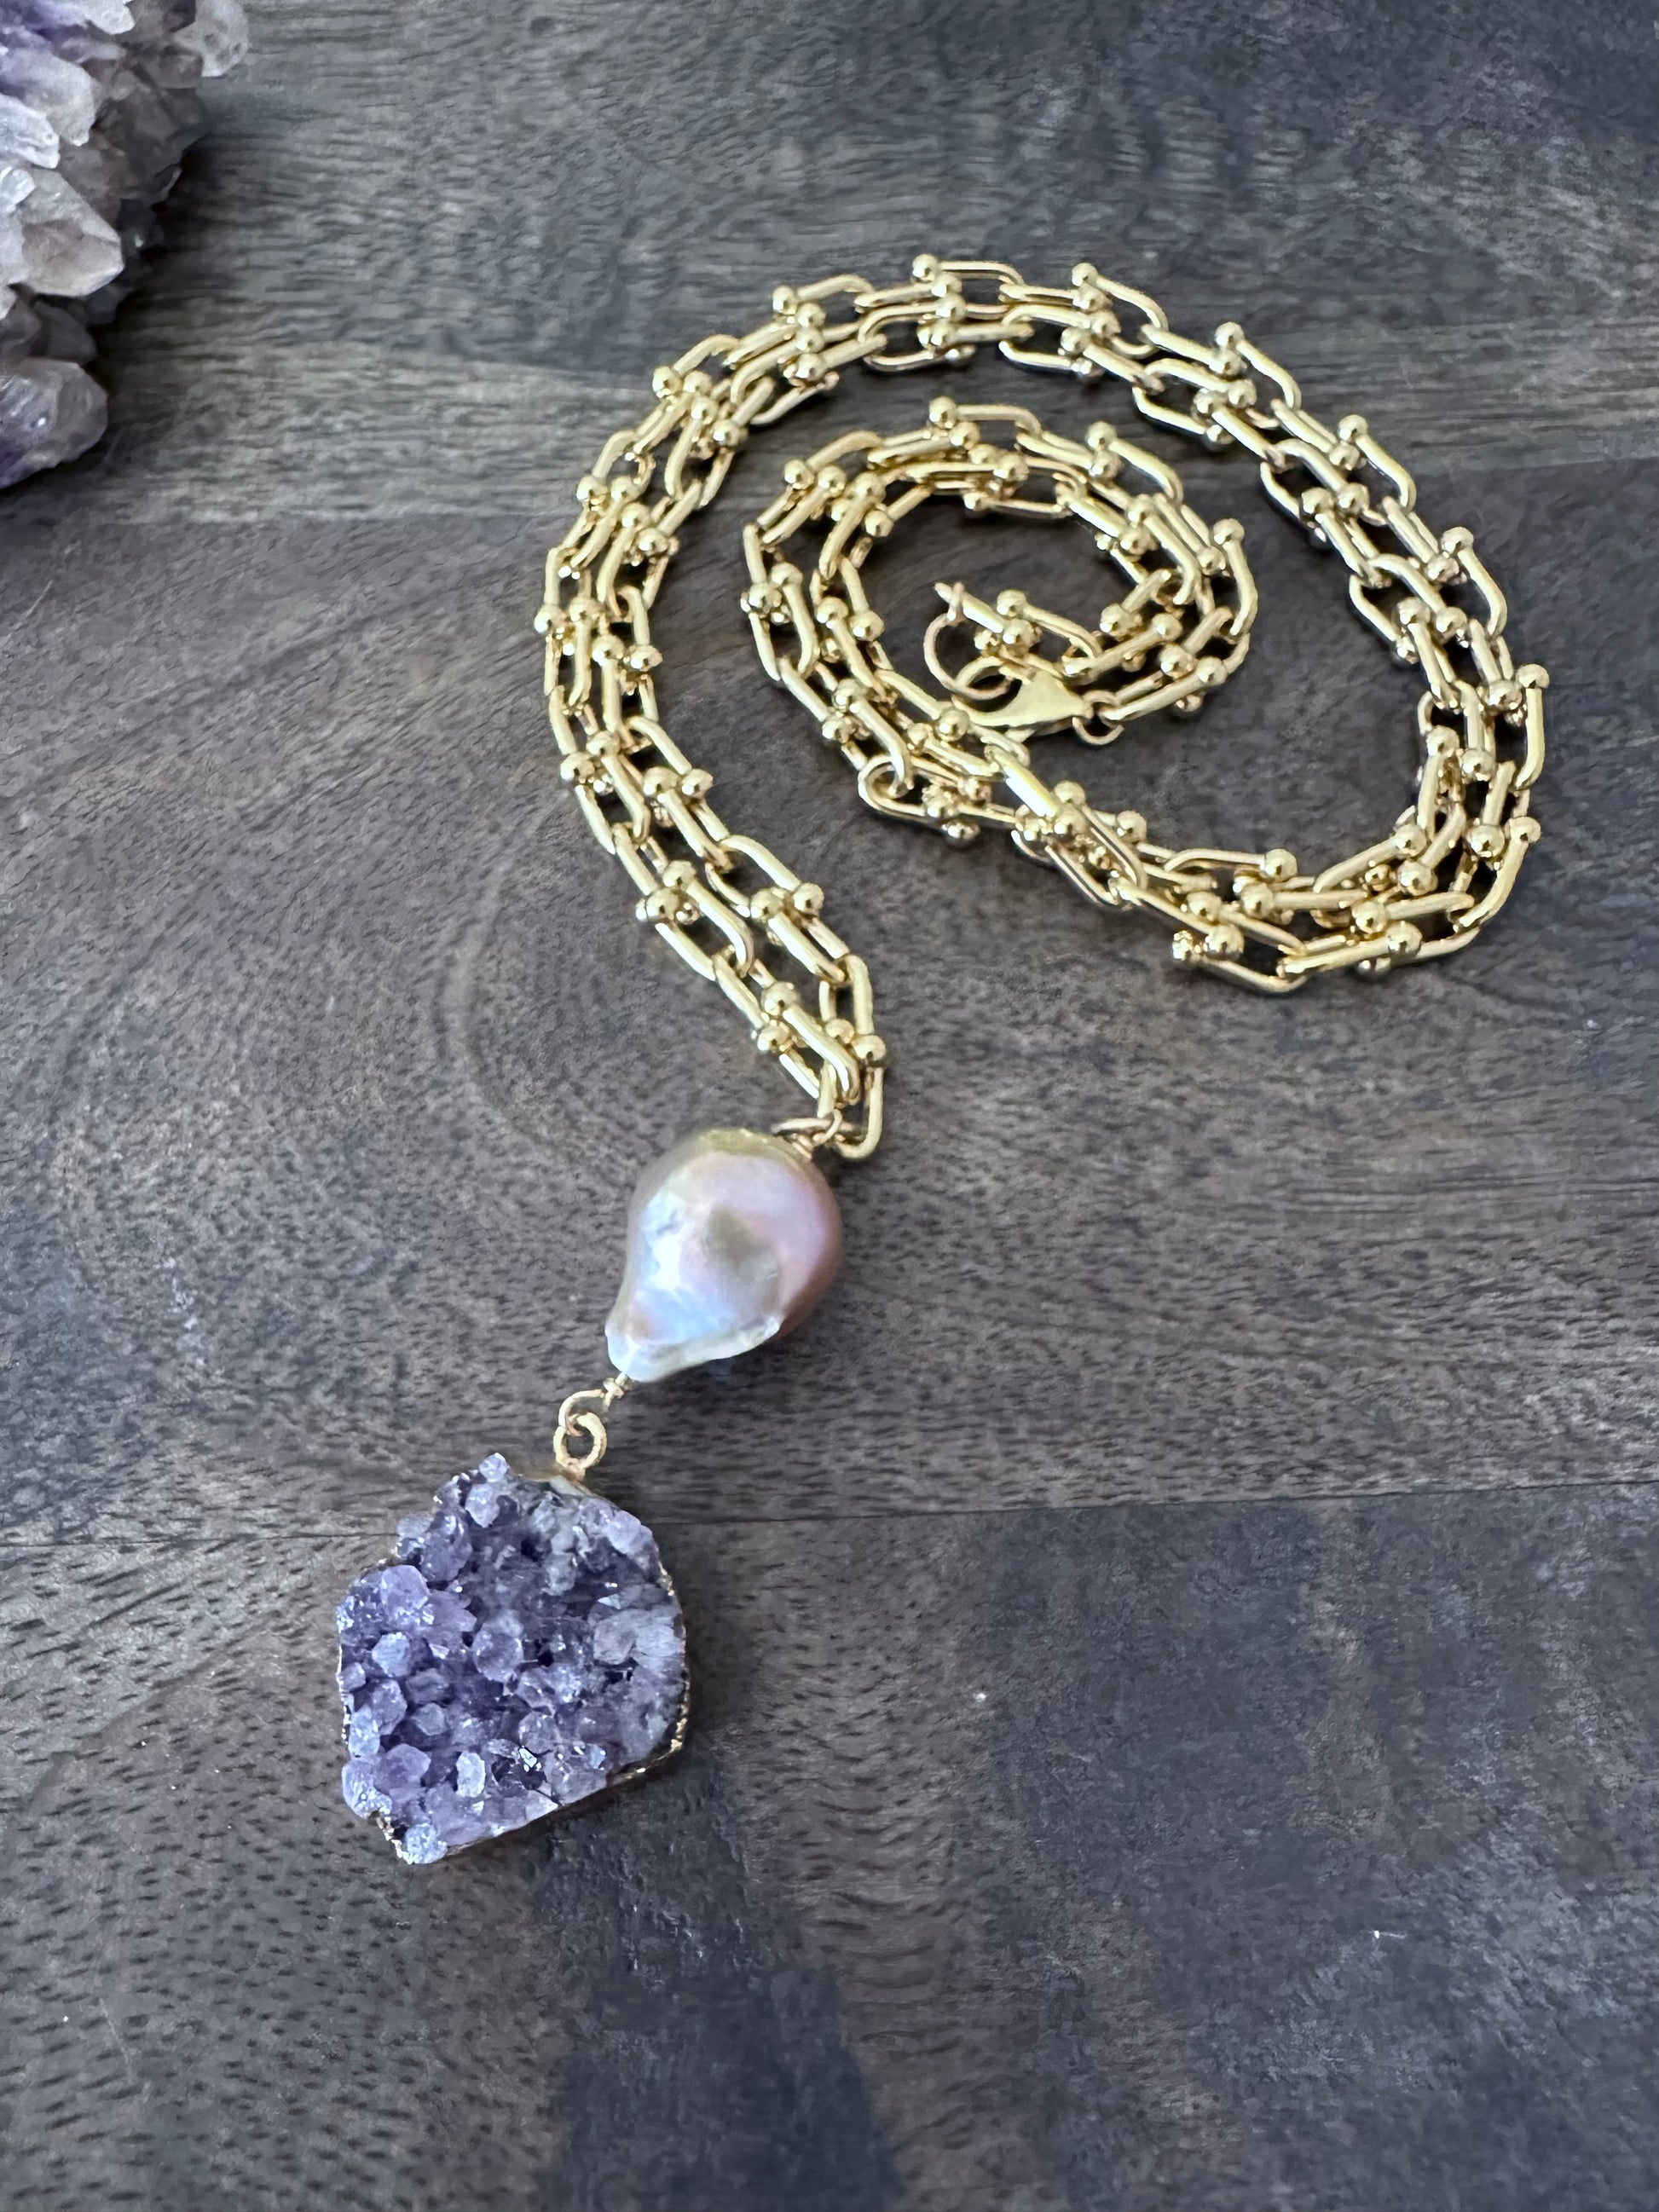 Large pink fireball shaped pearl woth a purple druzy pendant on a coiled gold chain on a wooden background